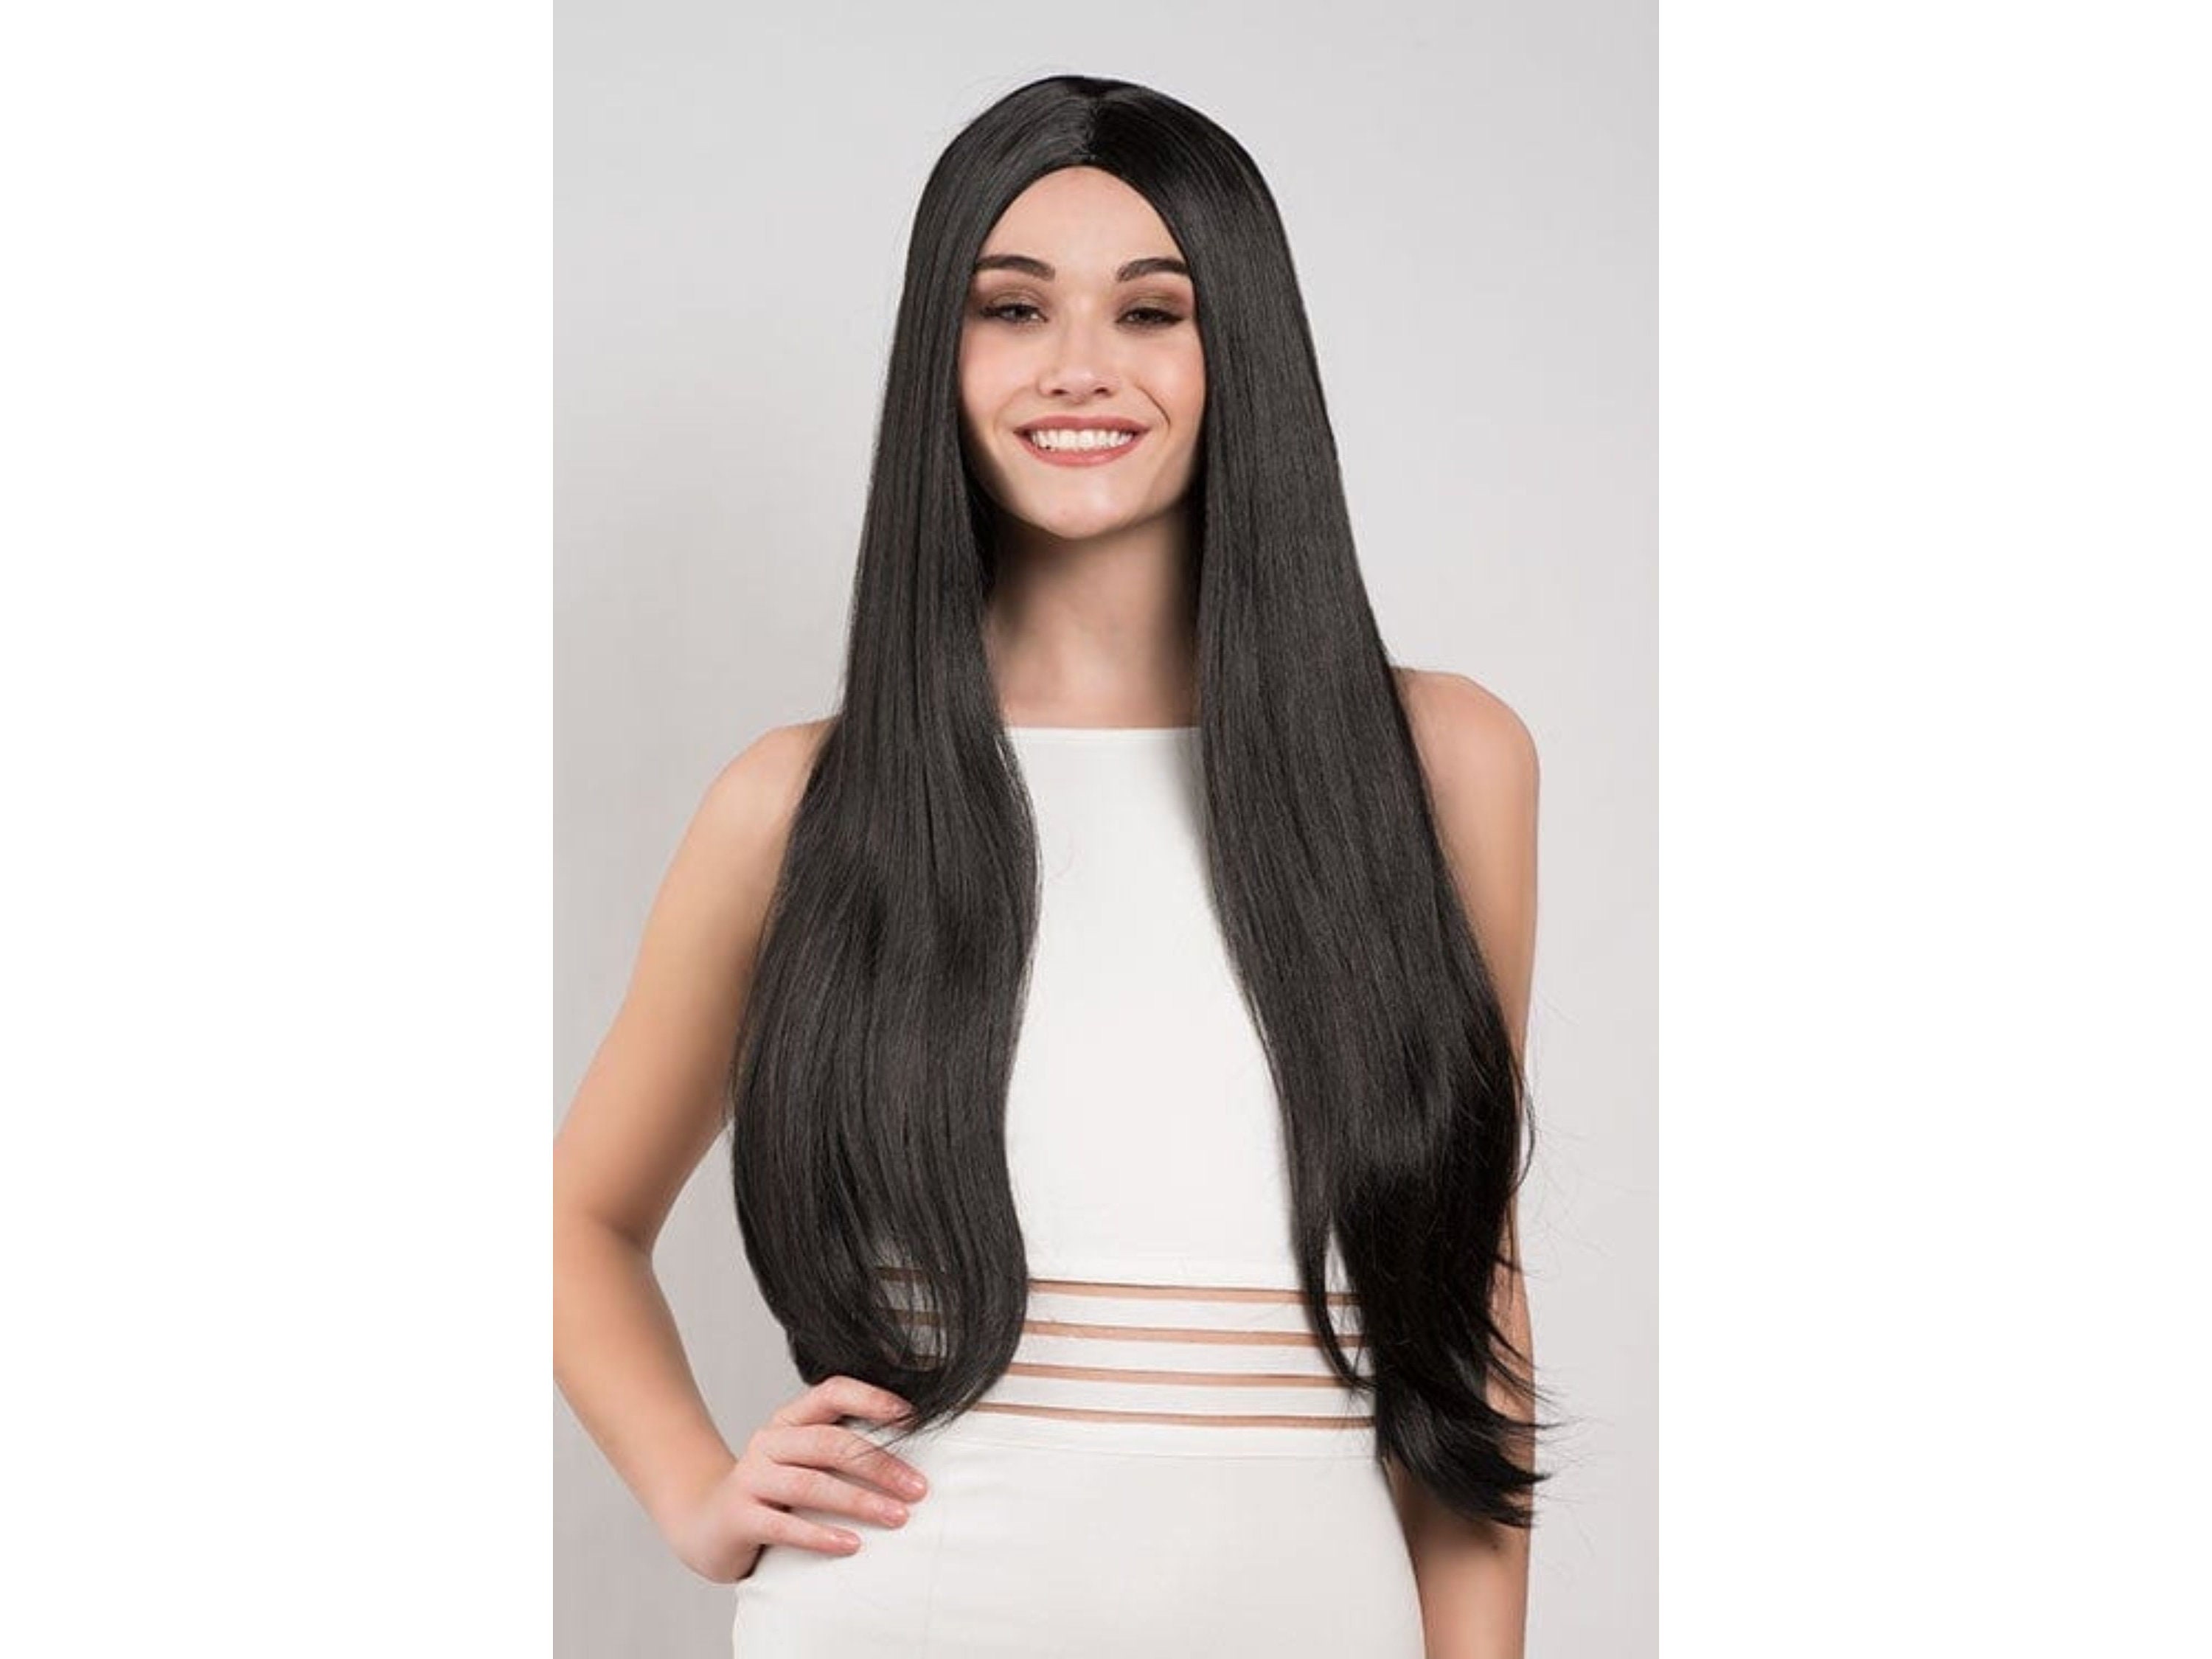 Mersi Wednesday Addams Wig Long Black Wigs for Morticia Straight Cosplay Costume Wigs Synthetic Hair Wig 27 Inch with Wig Cap S034BK 